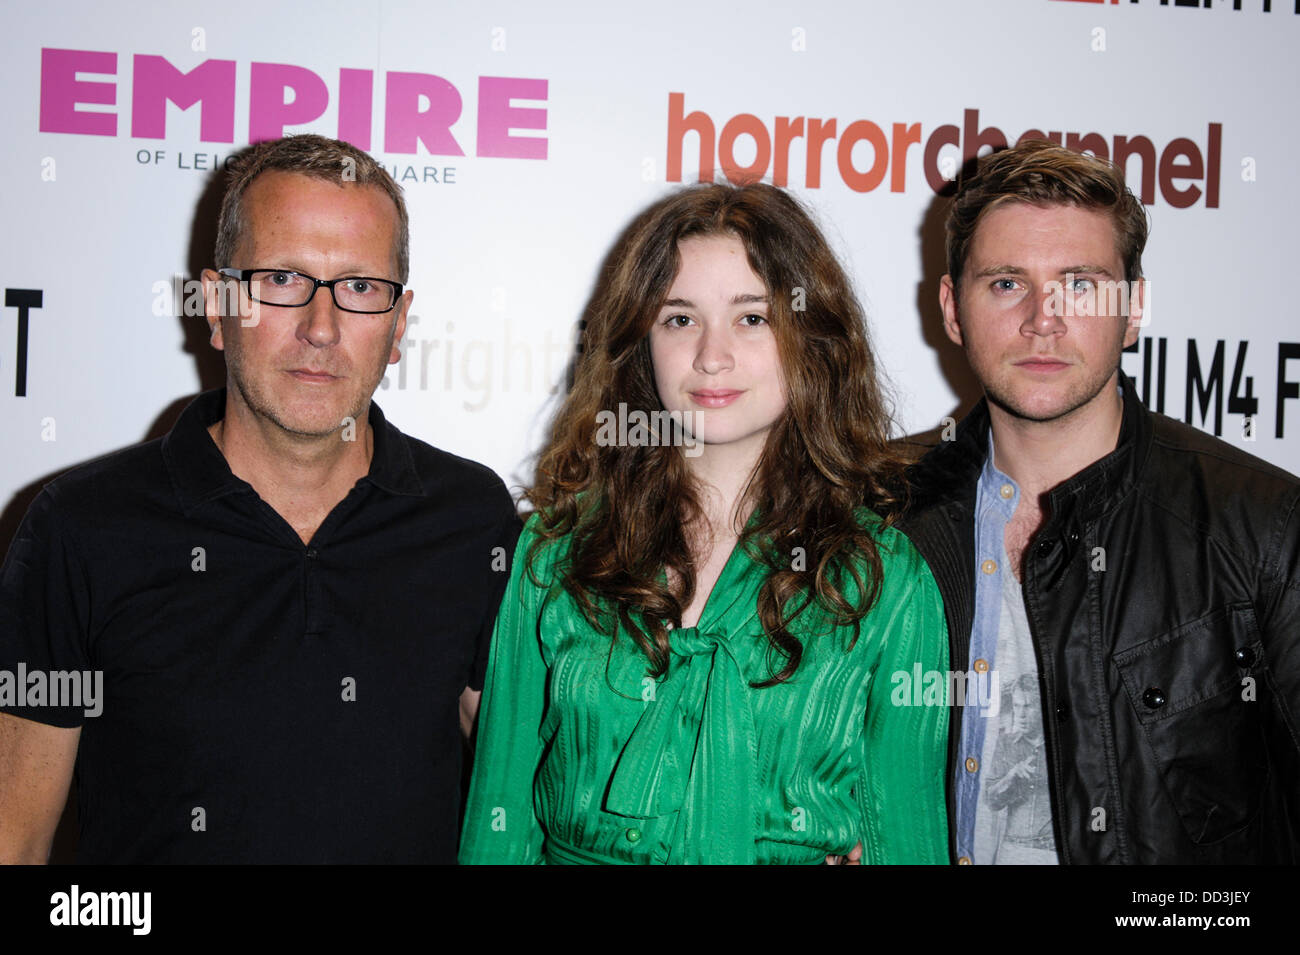 Director, Jeremy Lovering, Alice Englert, Allen Leech  attends The 14th Frightfest Film Festival on Sun 25 August 2013 at The Empire, Leicester Square, LONDON to promote their film IN FEAR. Persons pictured: Director, Jeremy Lovering, Alice Englert, Allen Leech . The festival, now in its 14th year, attracts thousands of genre fans each August to the heart of London's West End and the prodigious Empire Cinema, for five packed days of premieres, previews, personal appearances, signings and surprises. Picture by Julie Edwards Stock Photo